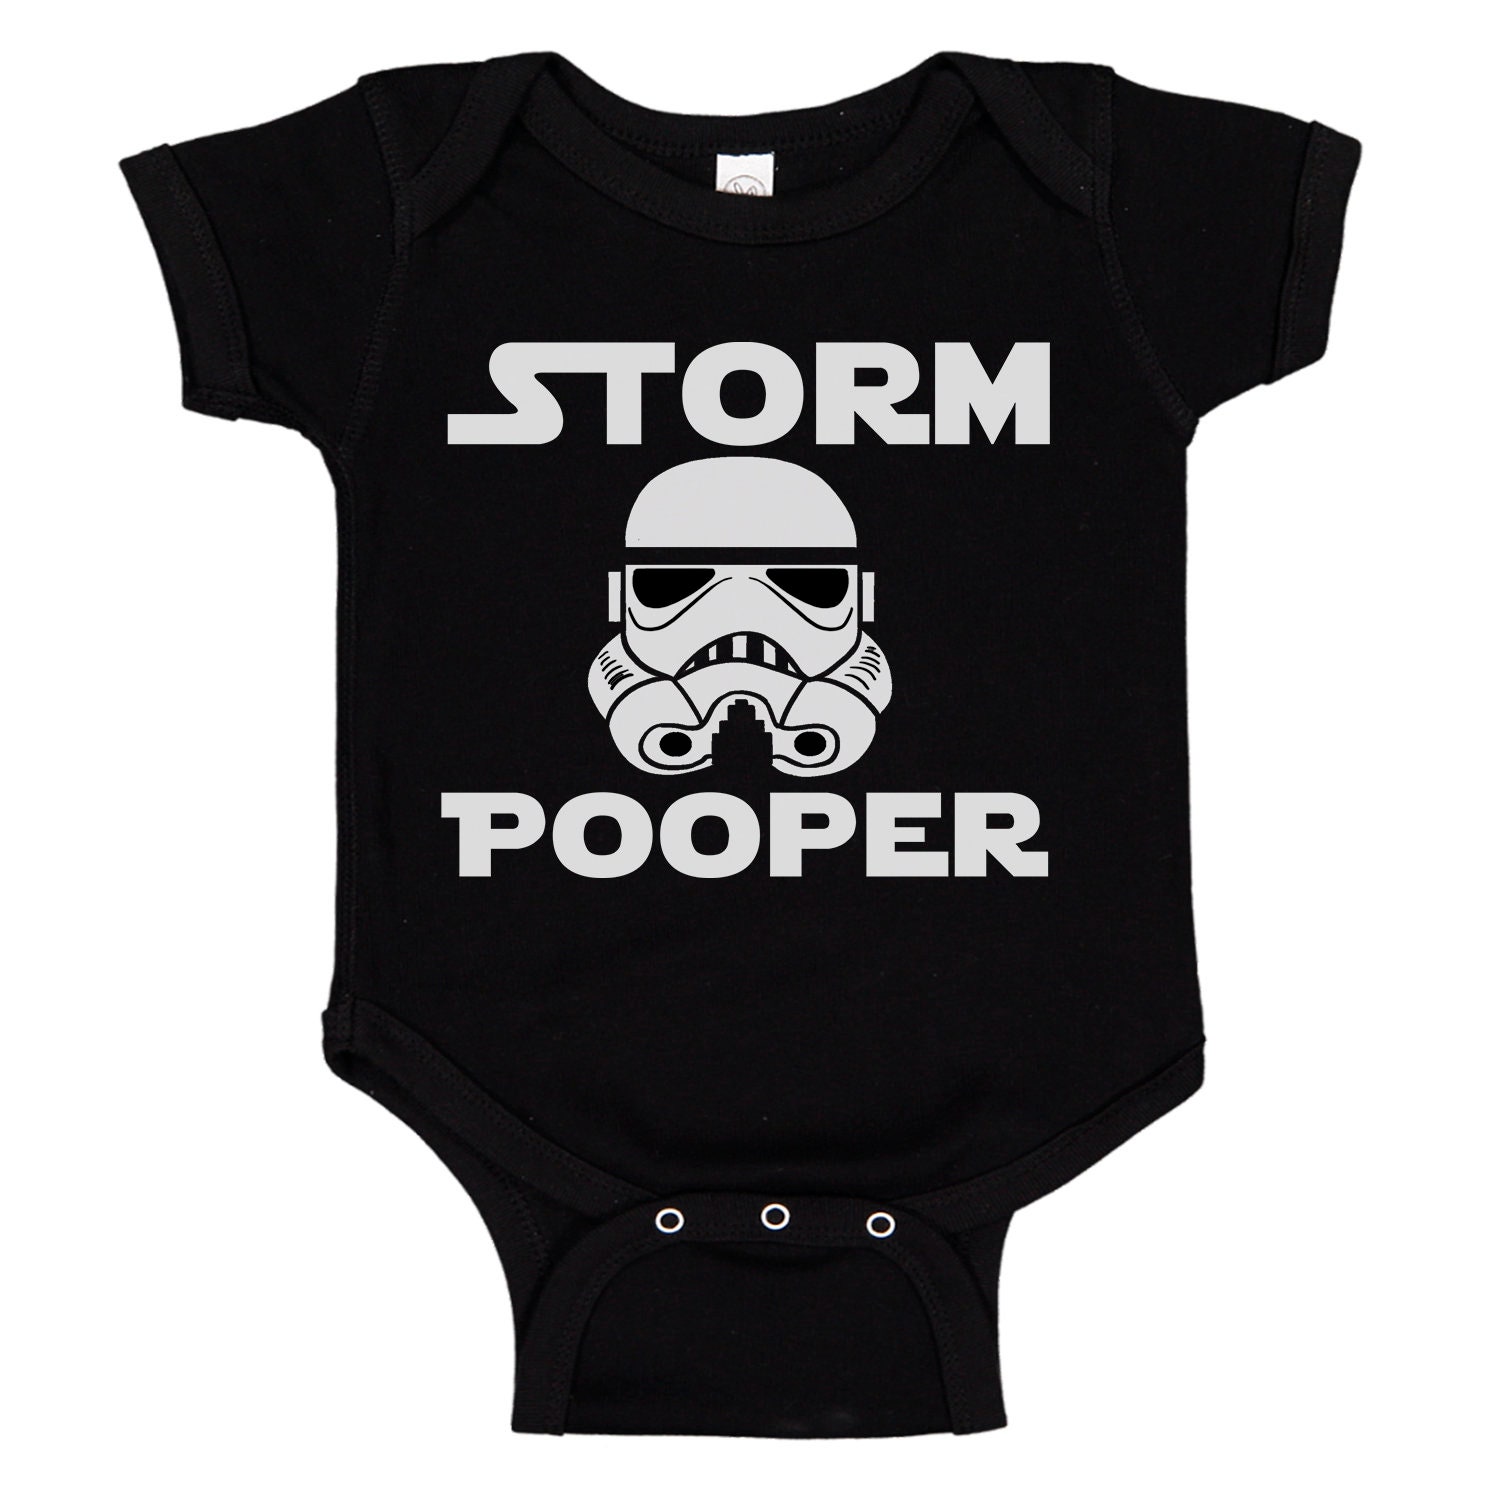 Details about   Storm Pooper Galaxy Baby Movie Parody Drone Trooper Full Diaper  Infant Bodysuit 